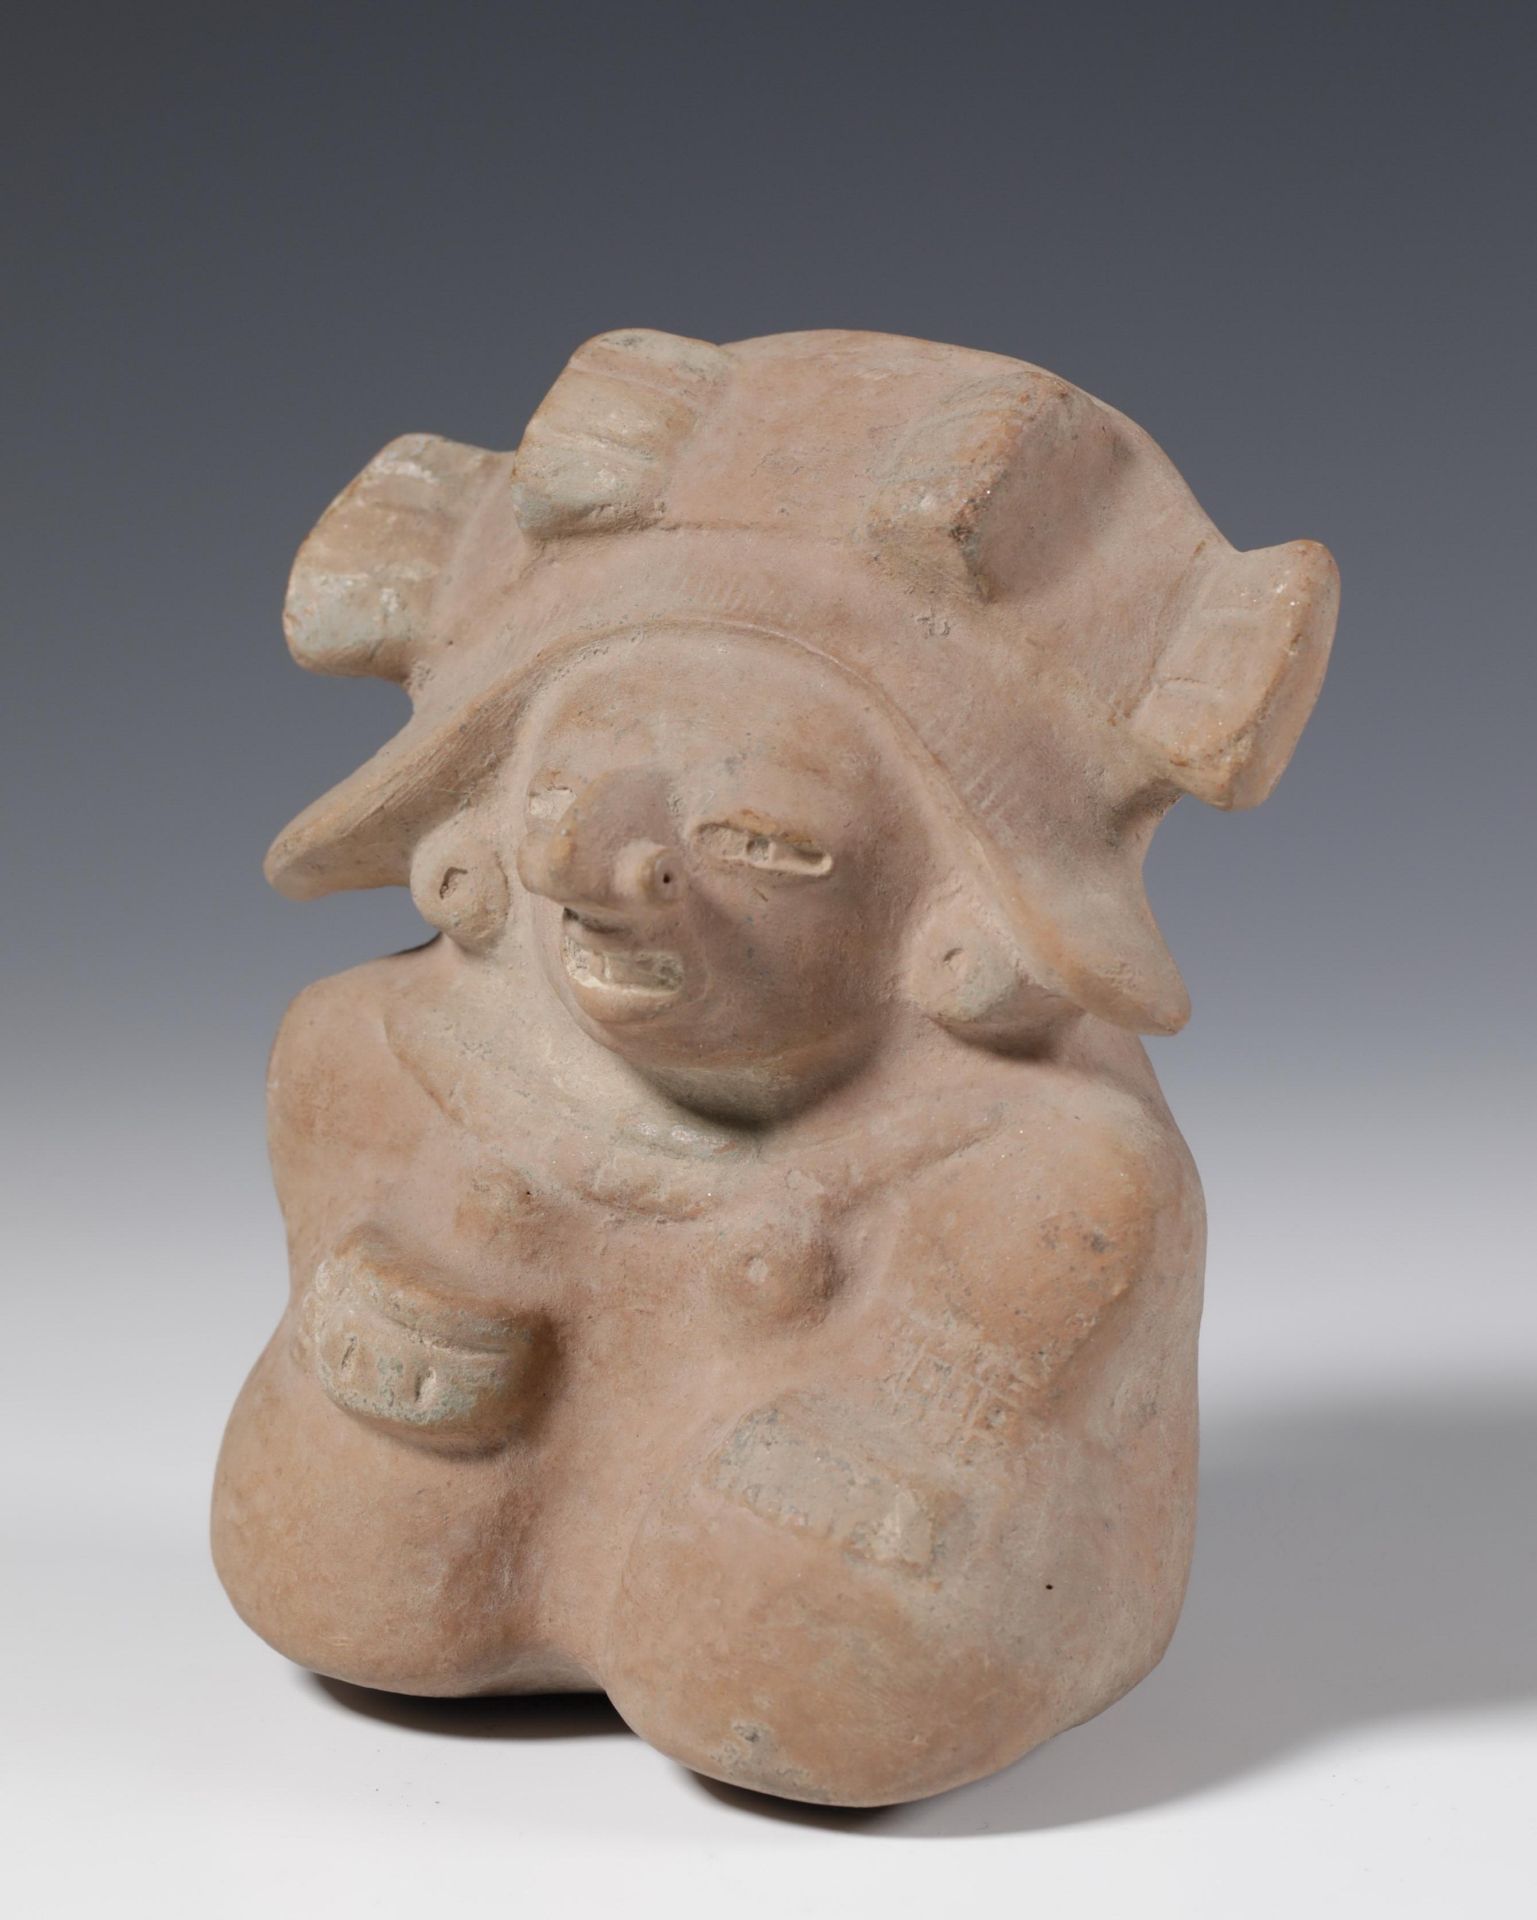 El Salvador, Classic Maya, molded buff brown pottery seated figure holding a bowl in her right hand, - Image 7 of 7